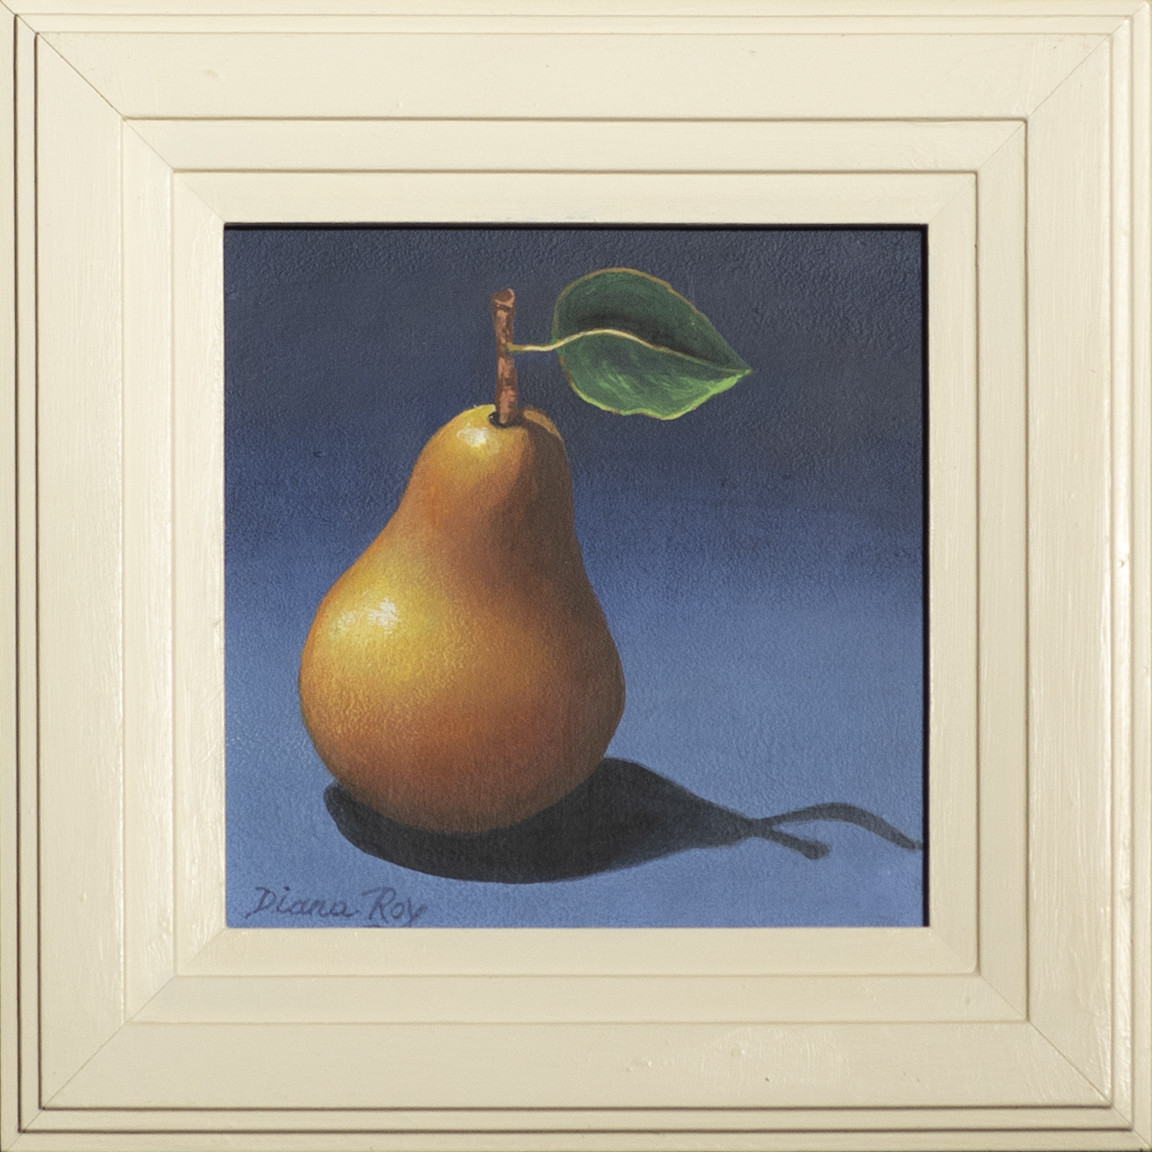 "Pear" by Diana Roy 1940-2019 